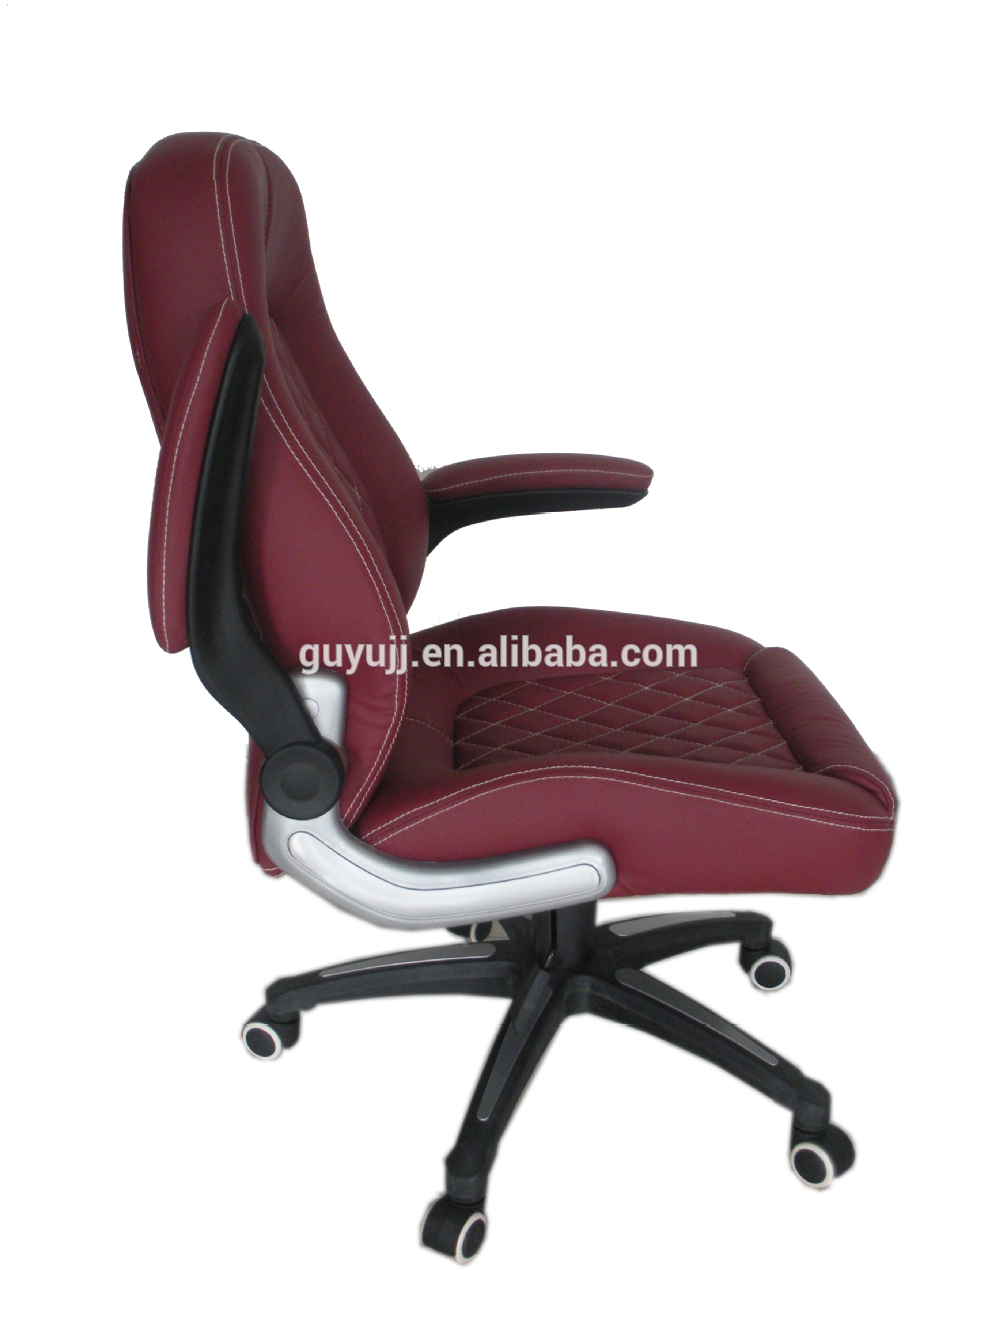 Y-2862 New Style Leather Lift Swivel Office Chair Red Chair for Wholesale